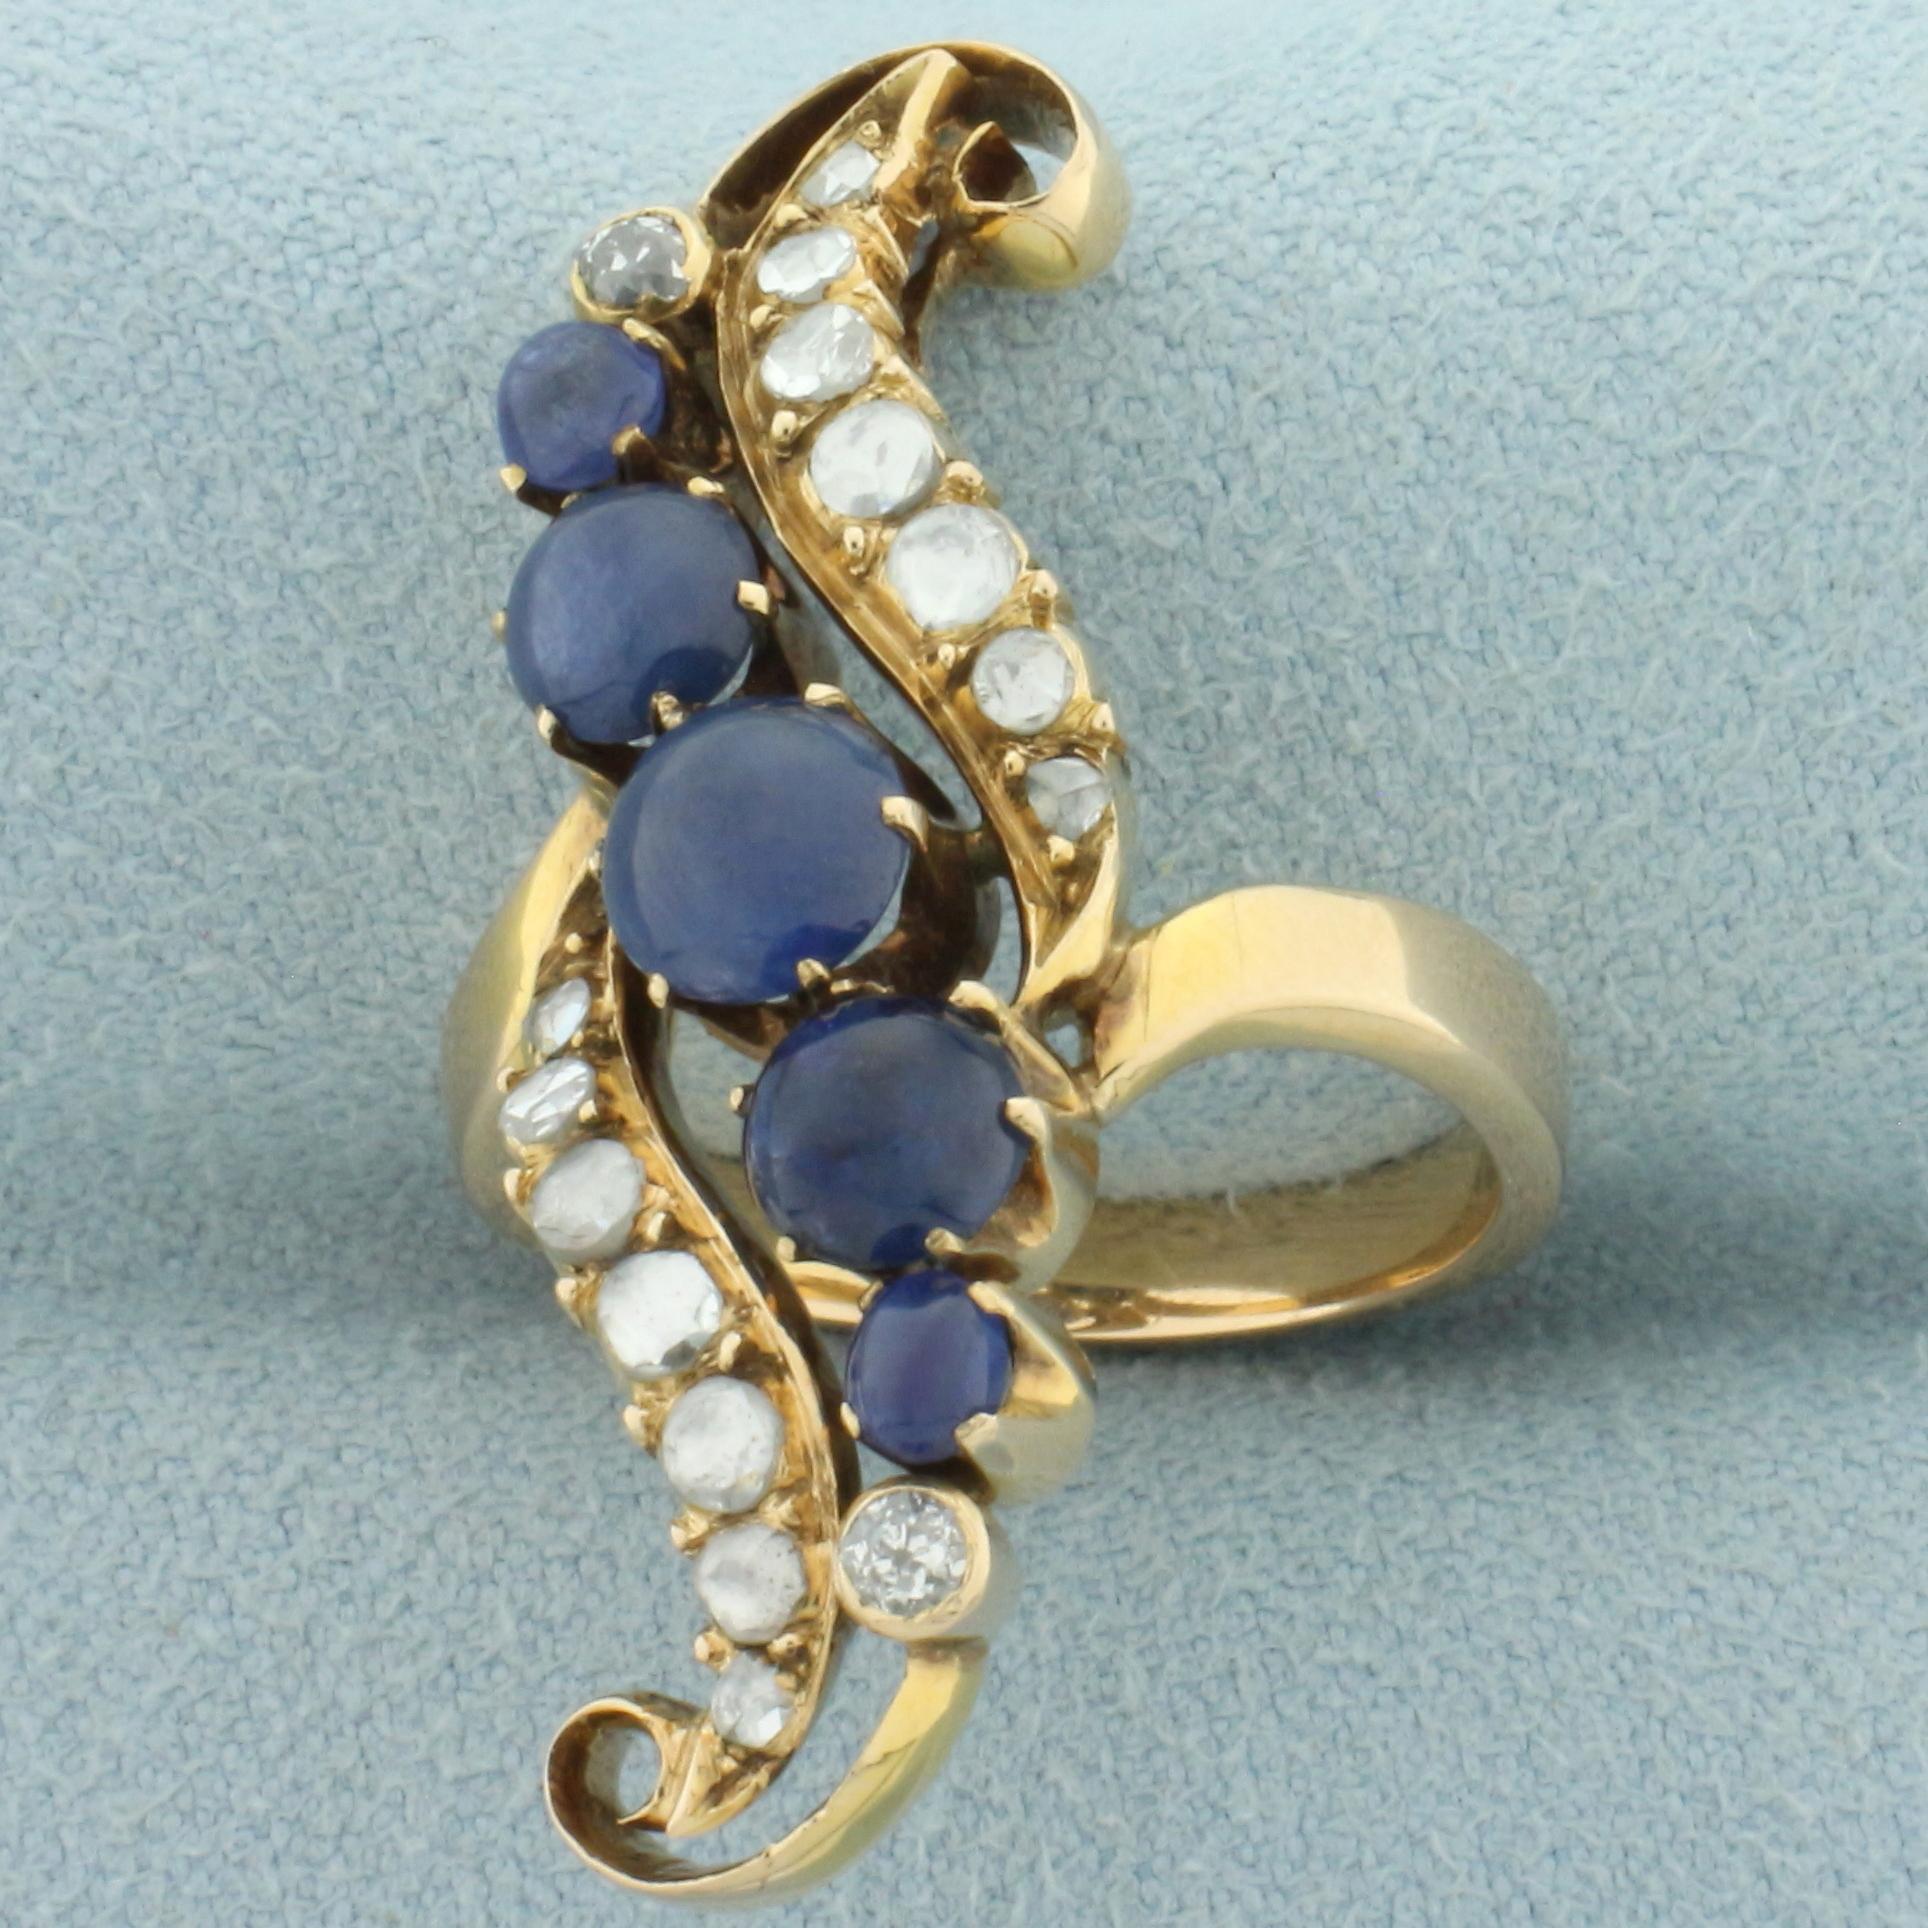 Antique Old Cut Diamond And Sapphire Ring In 14k Yellow Gold